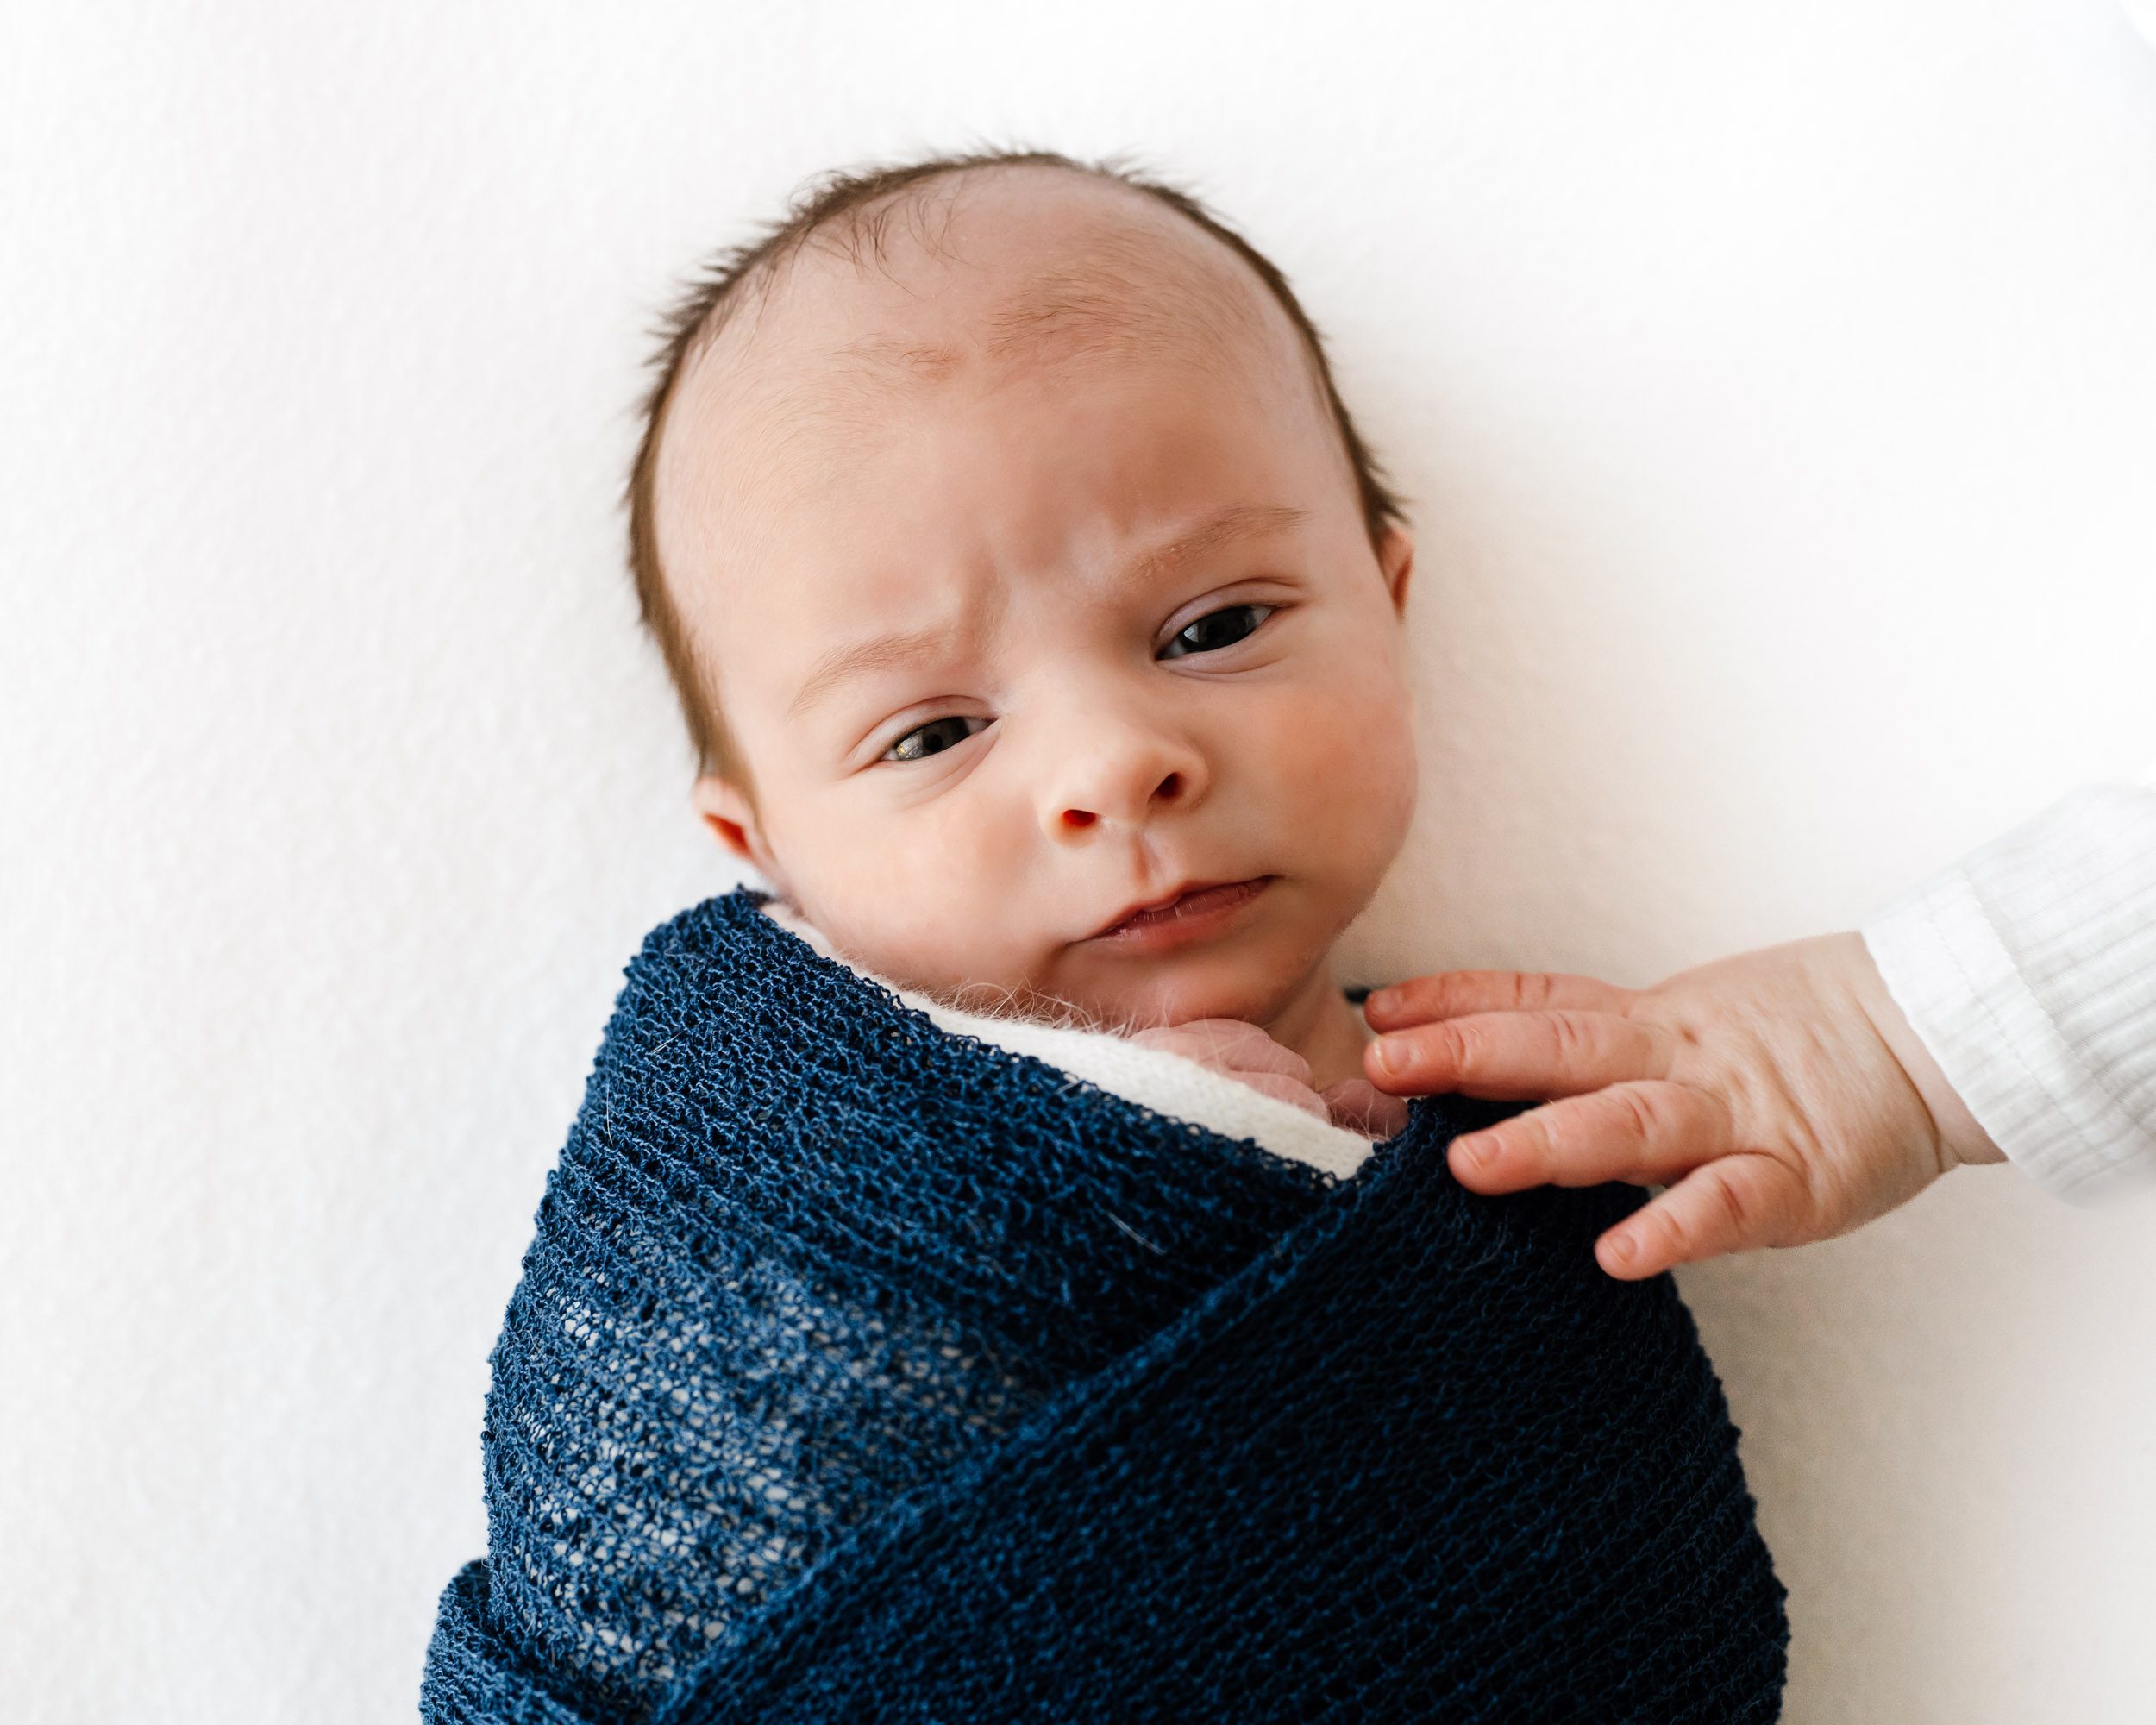 a baby boy wrapped in a blue swaddle blanket laying on a white backdrop and looking directly at the camera while his big sister reaches out to touch him with her hand during a lifestyle newborn photo session